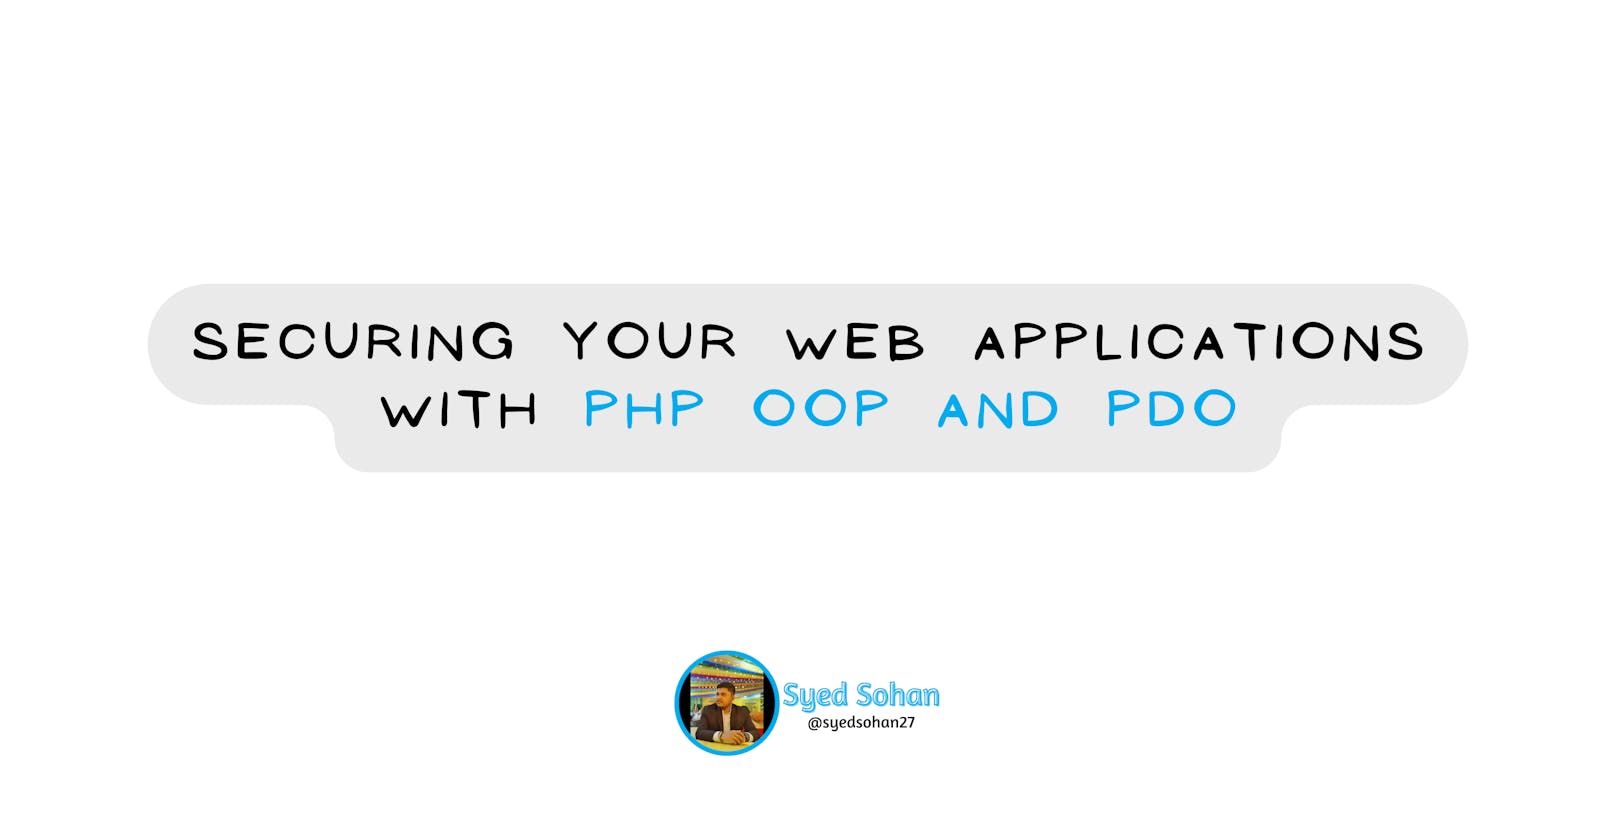 Securing Your Web Applications with PHP OOP and PDO